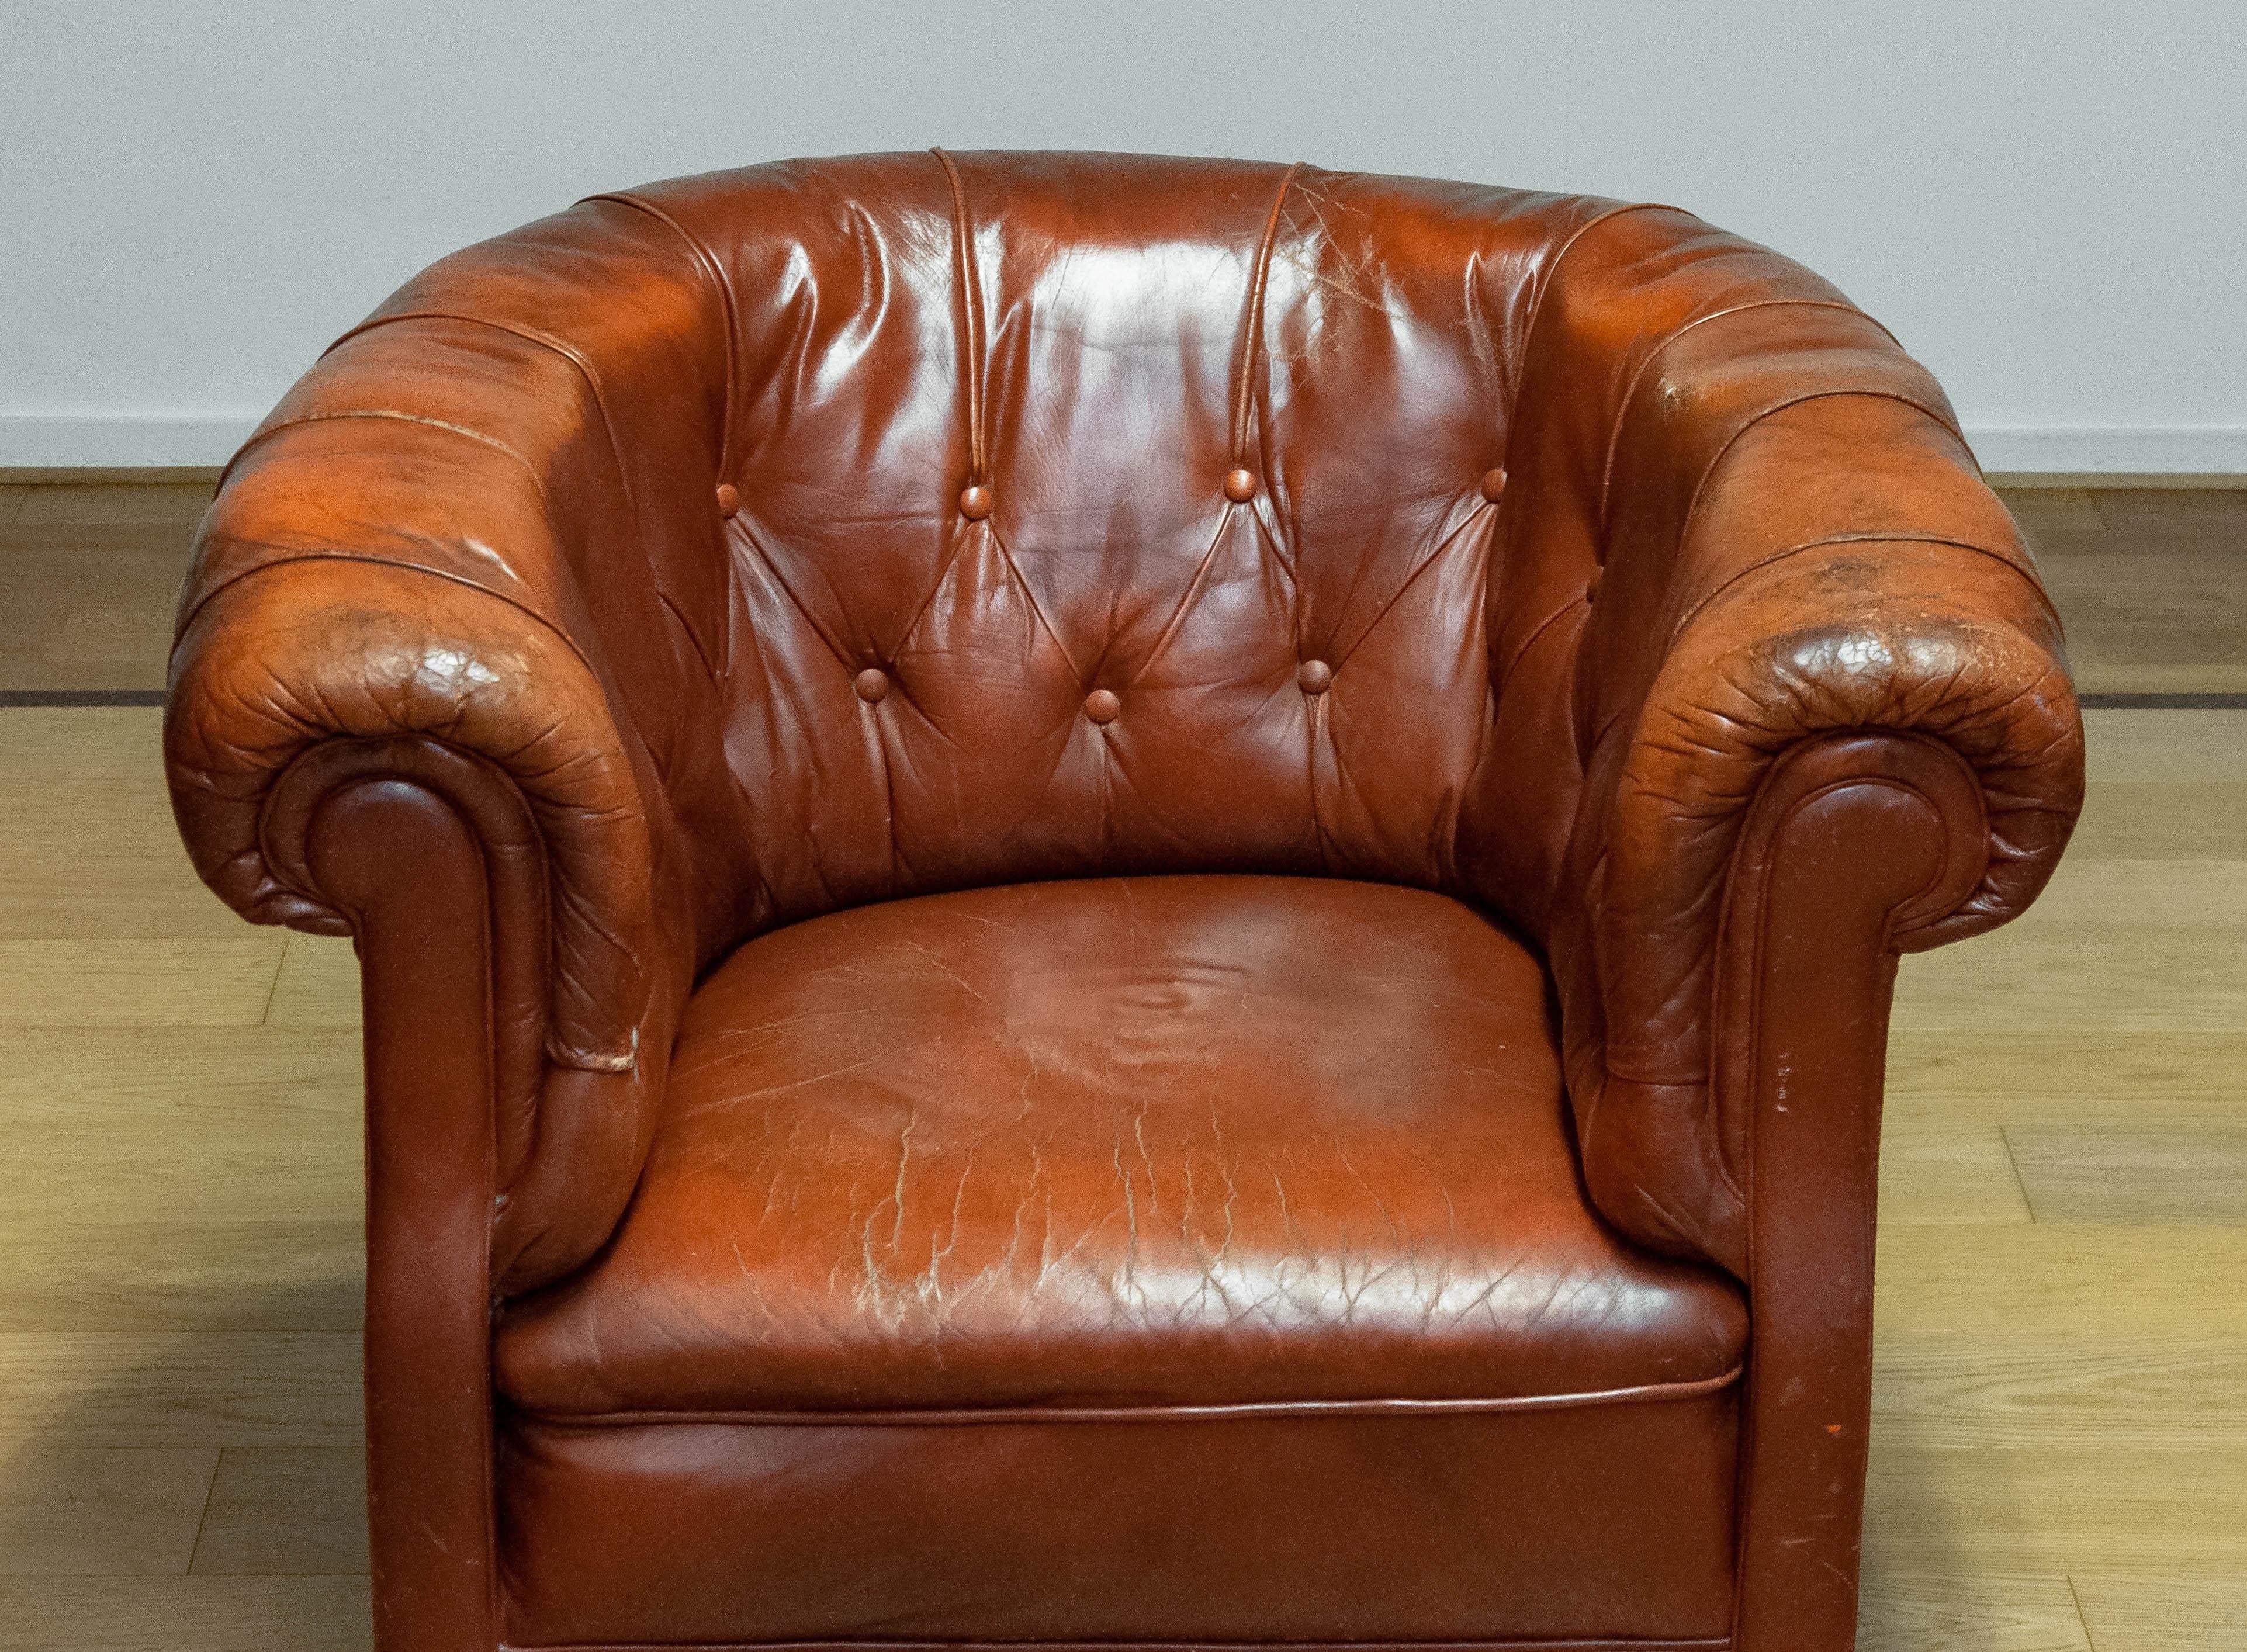 Mid-20th Century 1940s Swedish Tufted Club Chair 'Chesterfield Model' In Tan Brown Worn Leather